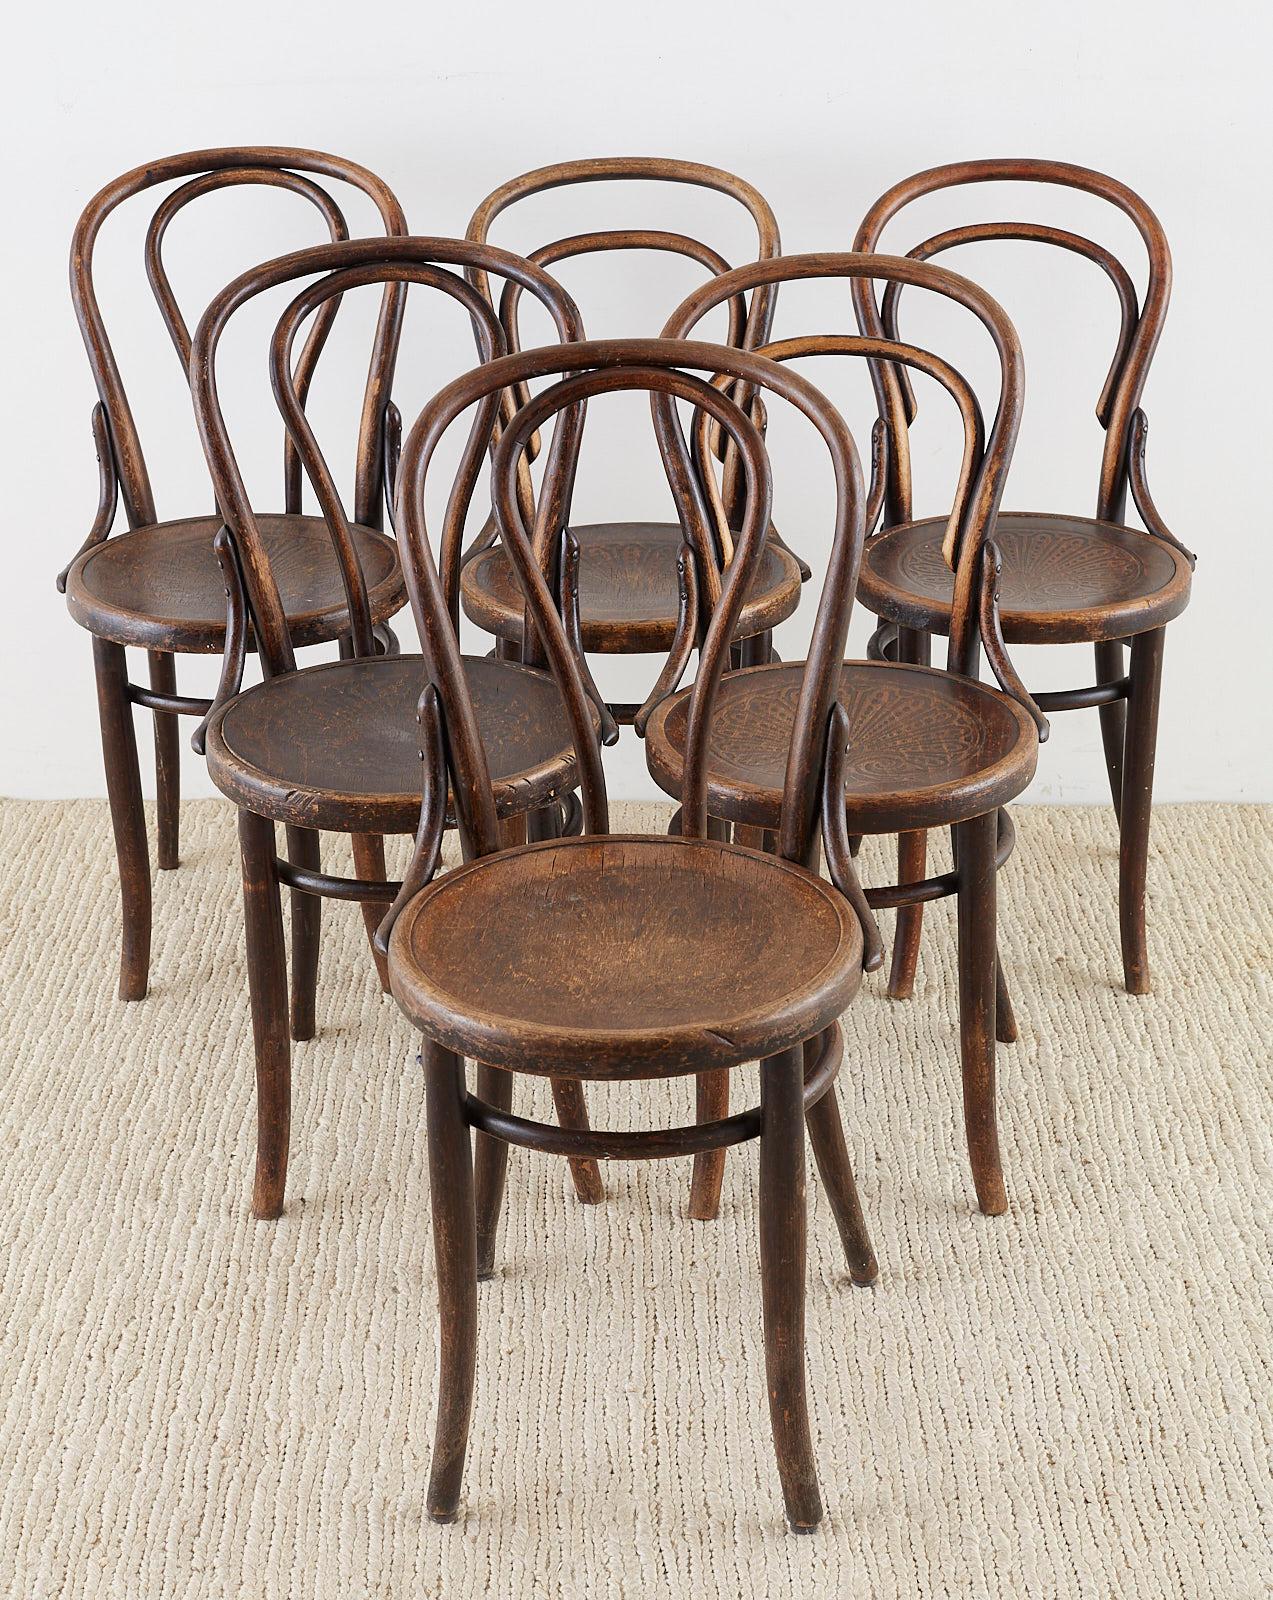 Vienna Secession Assembled Set of Seven Viennese Thonet Bentwood Chairs